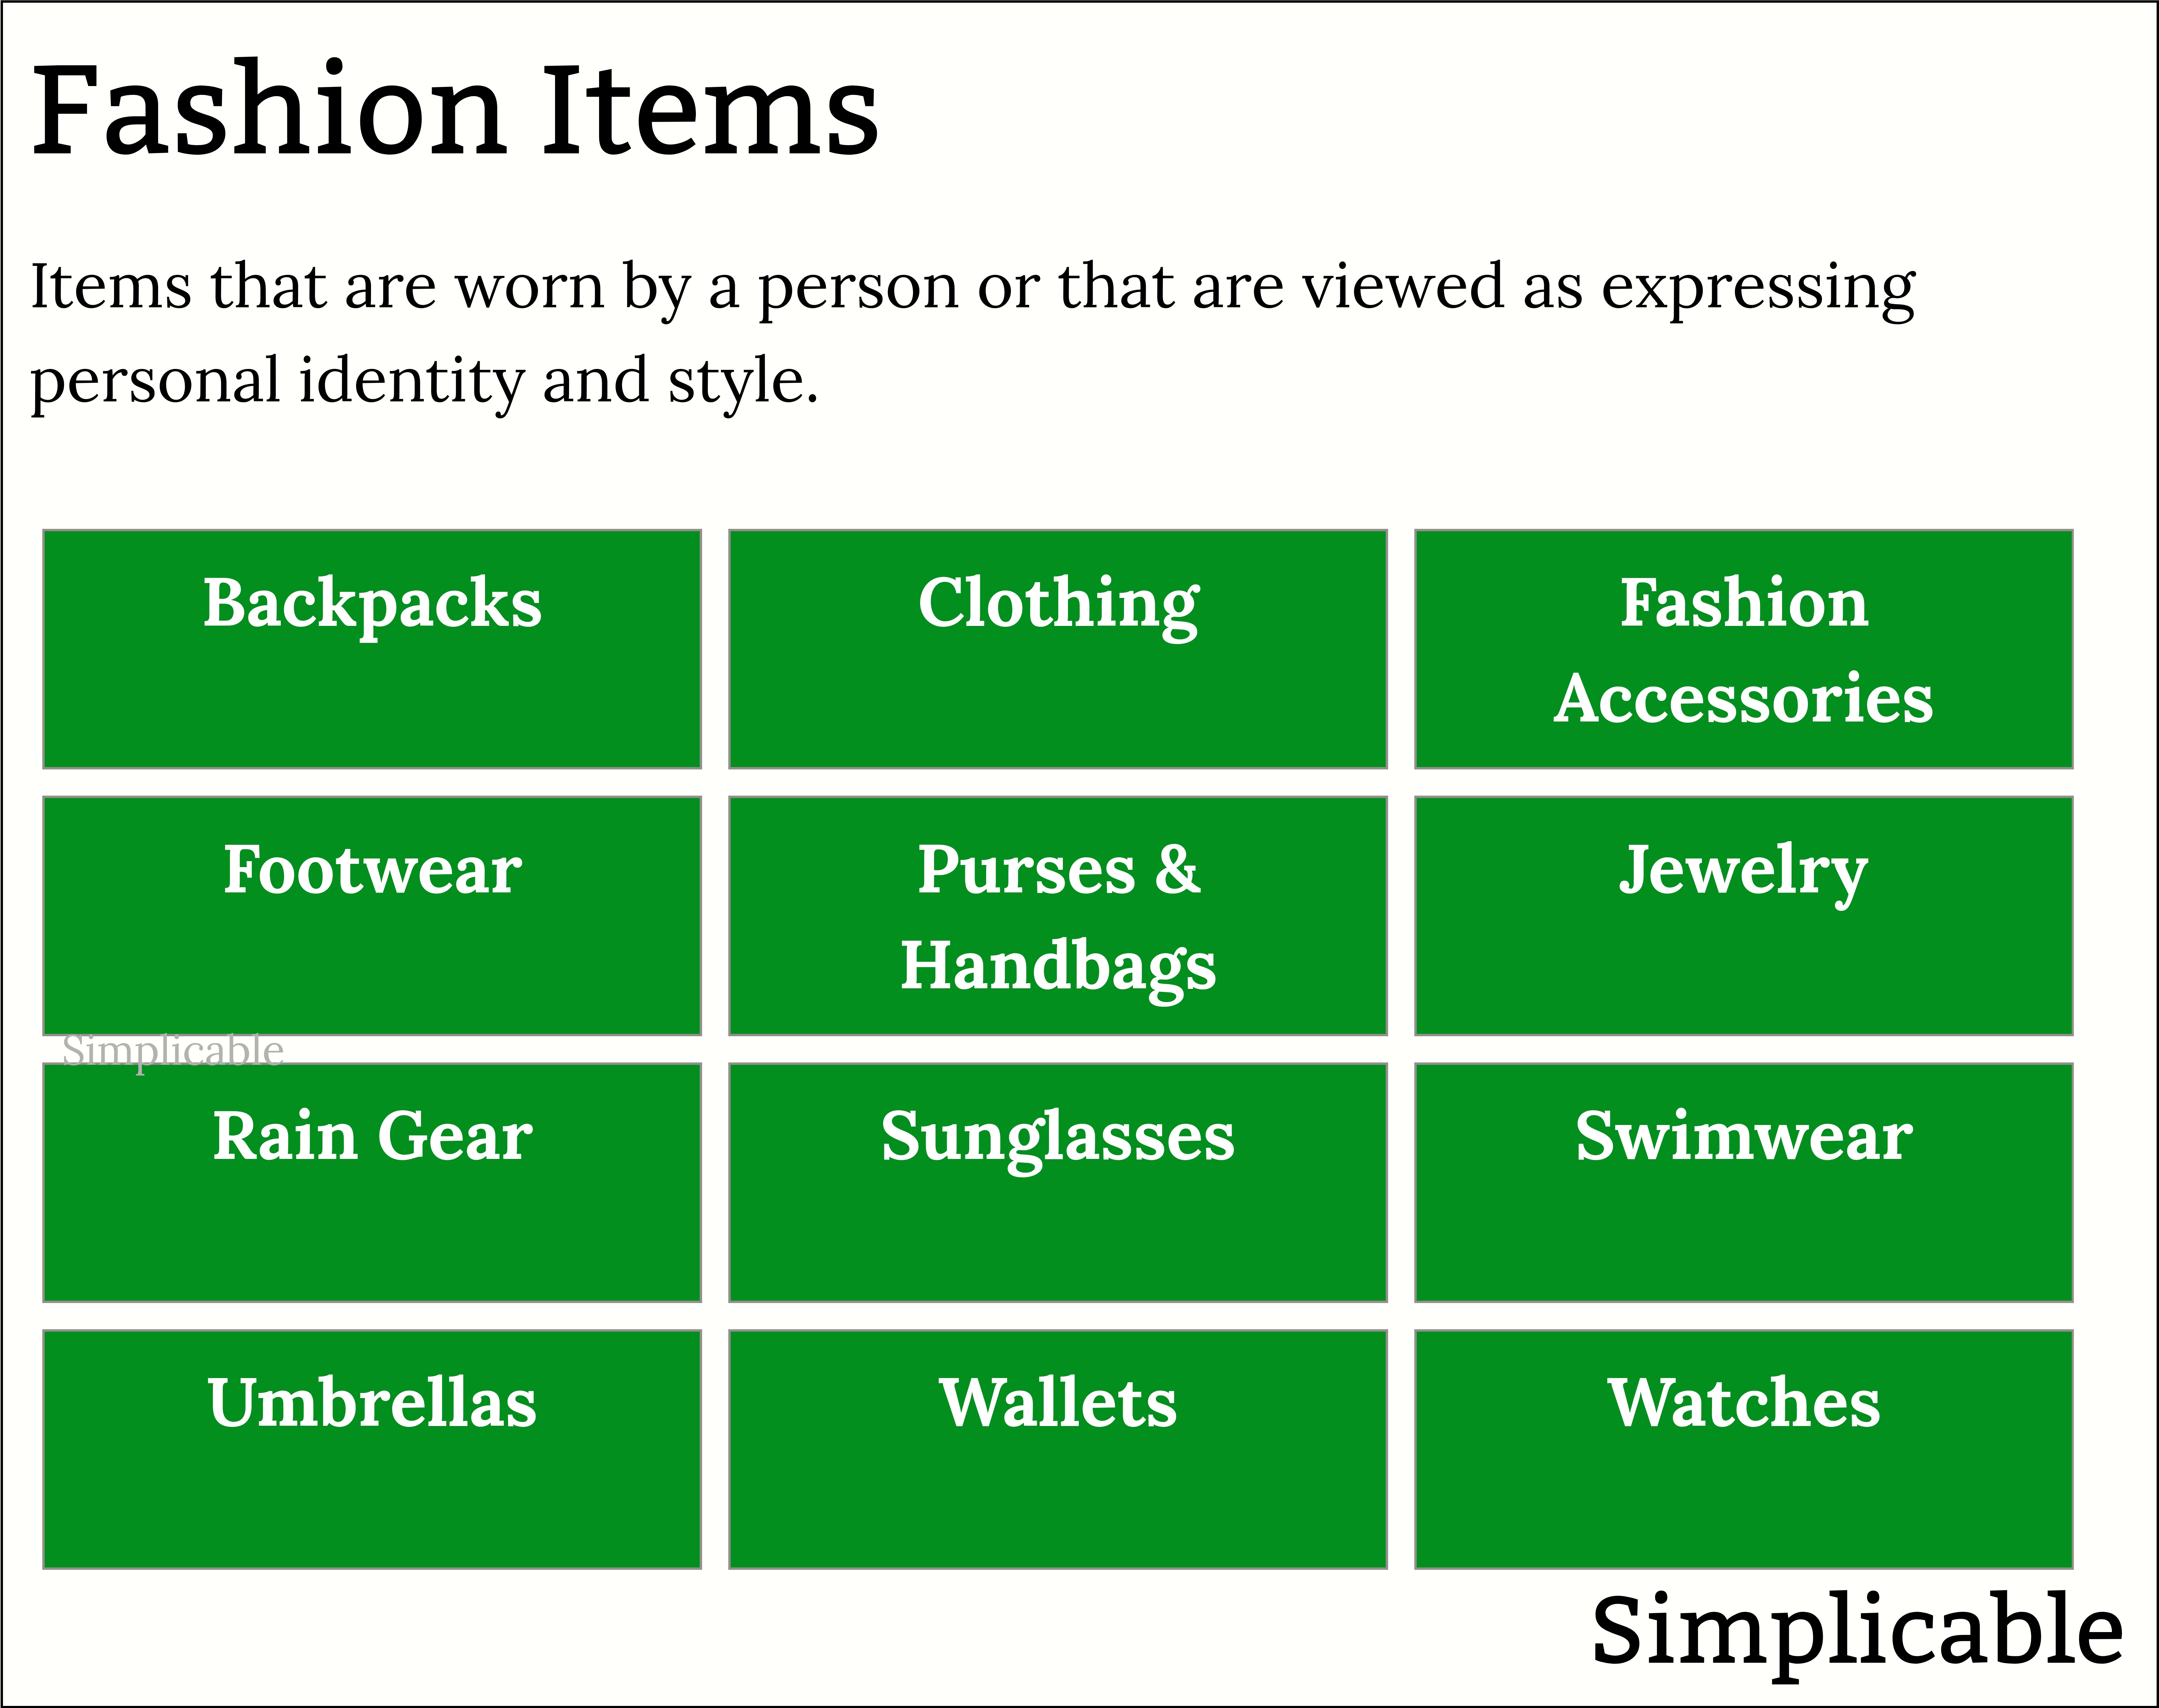 examples of fashion items